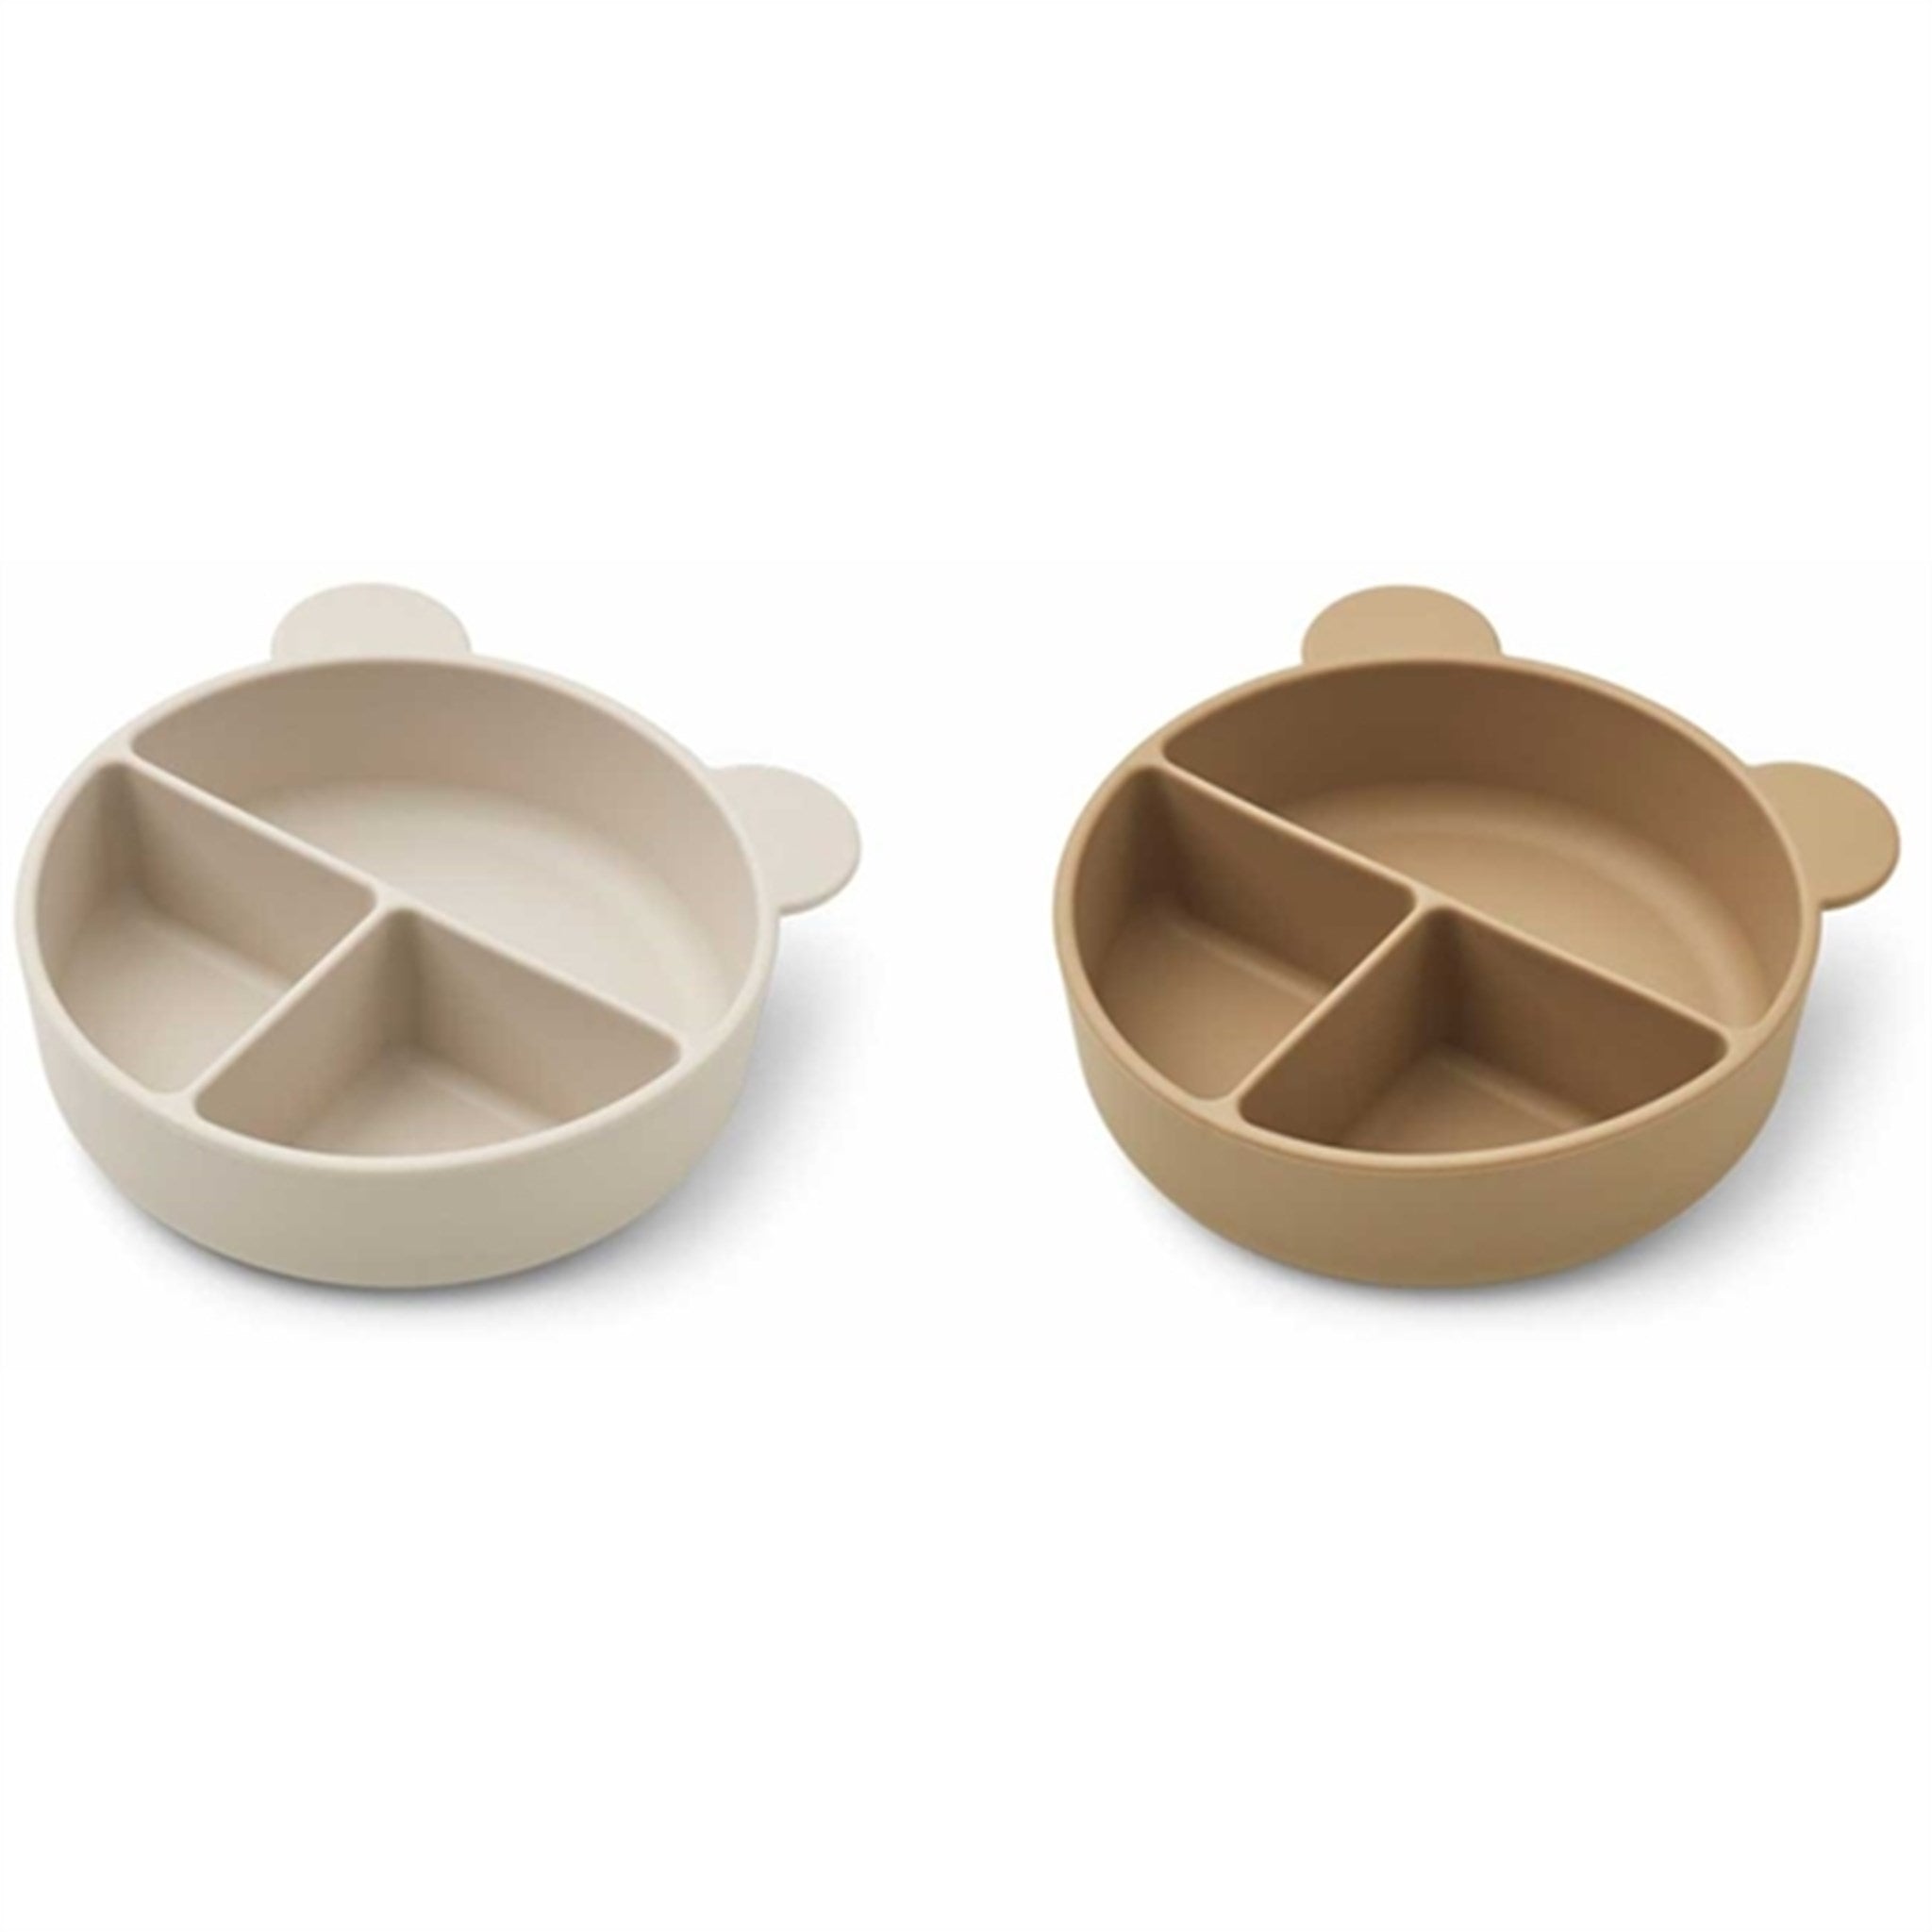 Liewood Conny Silicone Divider Bowl 2-pack Sandy/Oat Mix